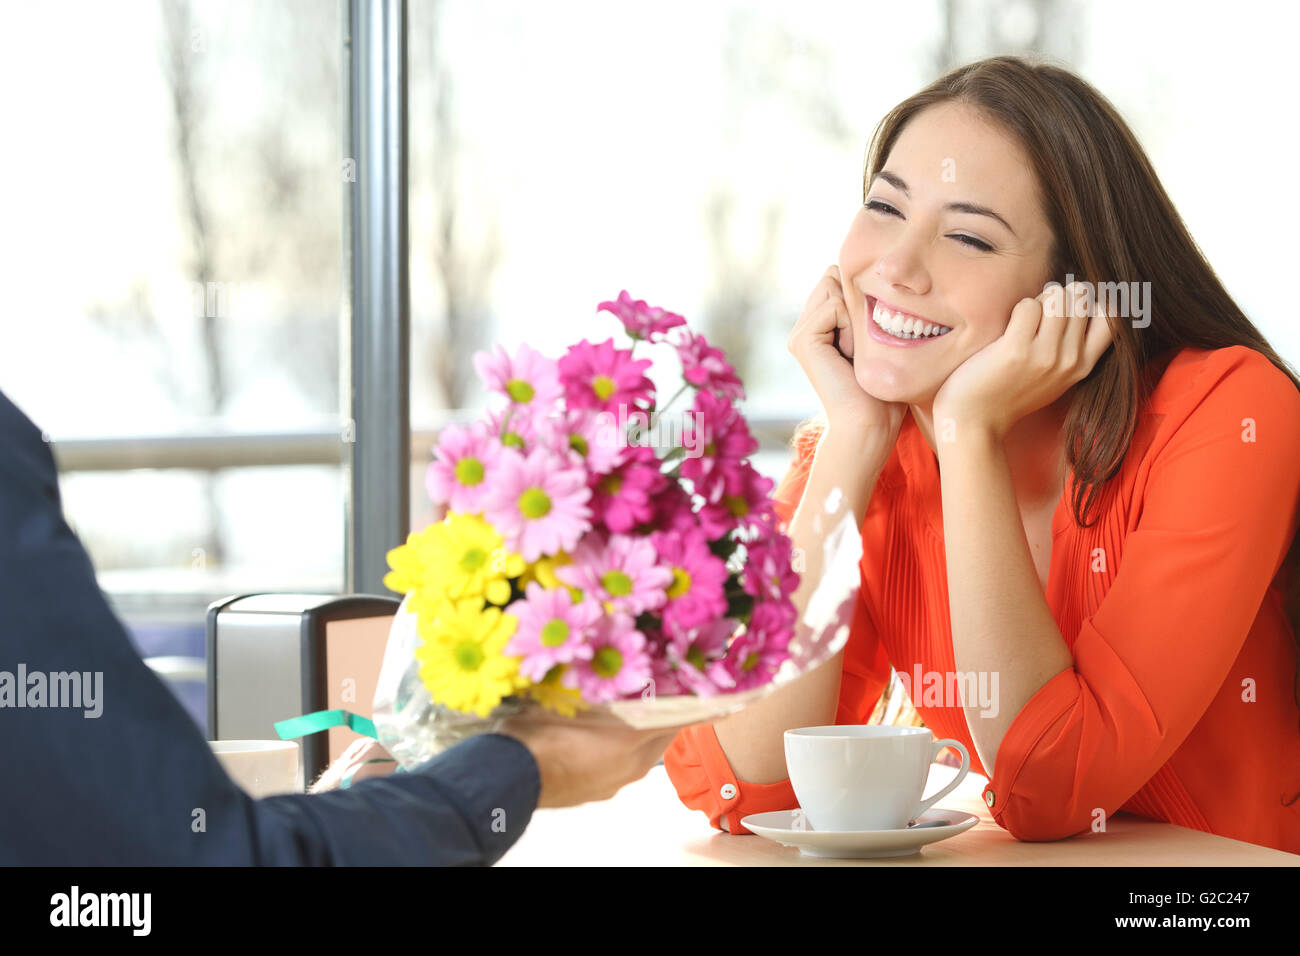 Couple dating and boyfriend giving a bouquet of flowers to his candid girlfriend in a coffee shop Stock Photo